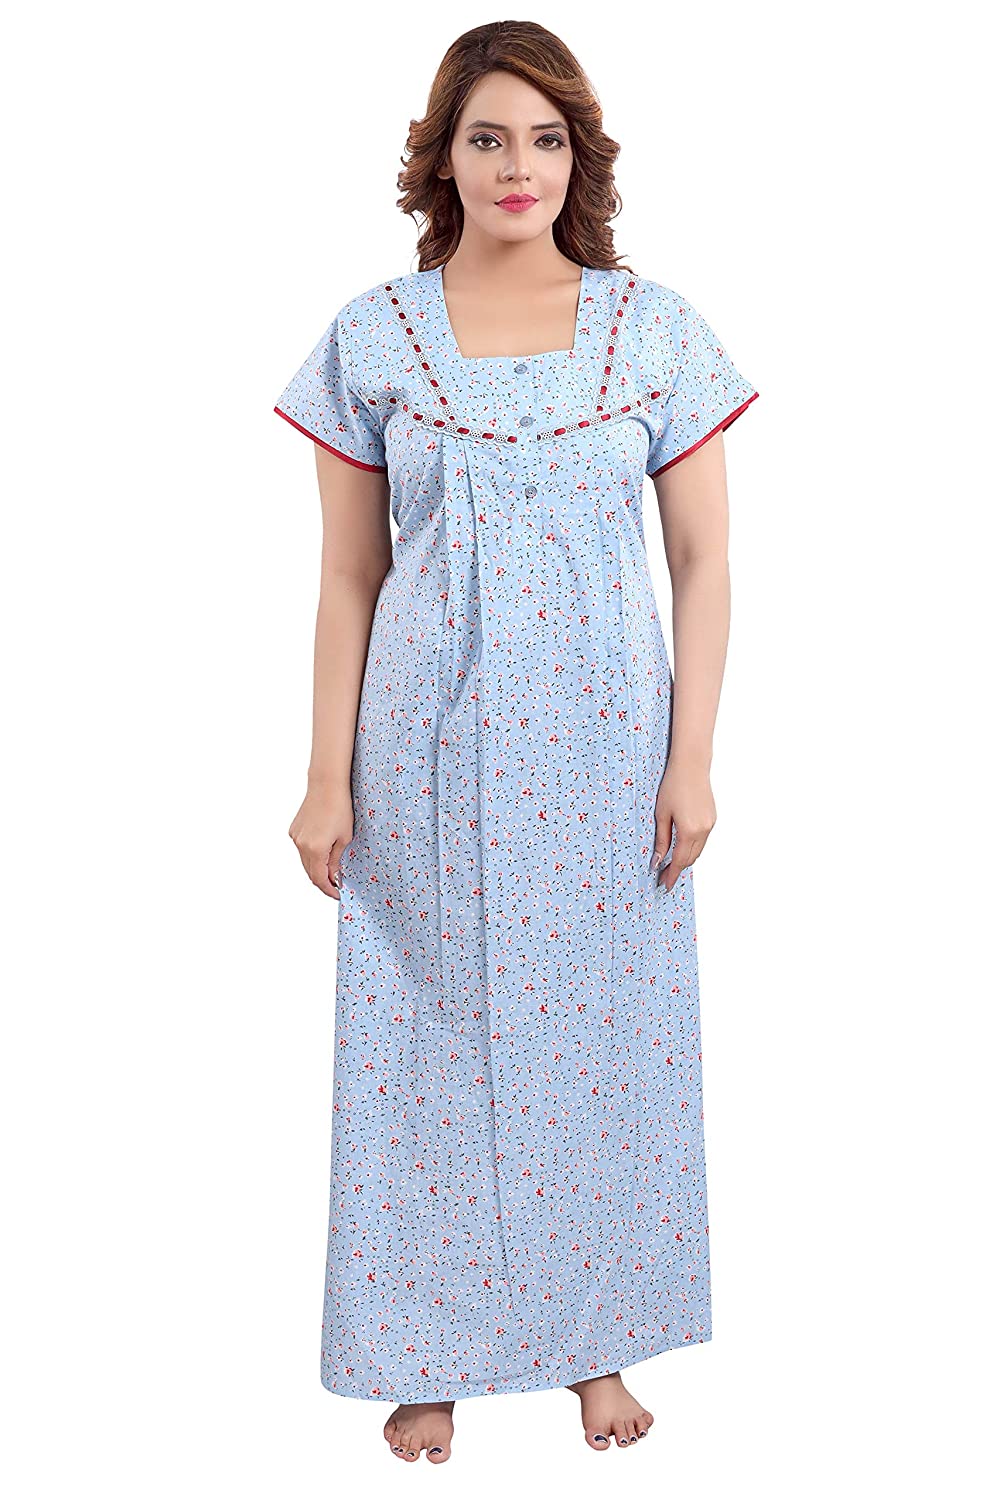 Regular Wear Embroidered Ladies Nighties Cotton, Free Size, Age